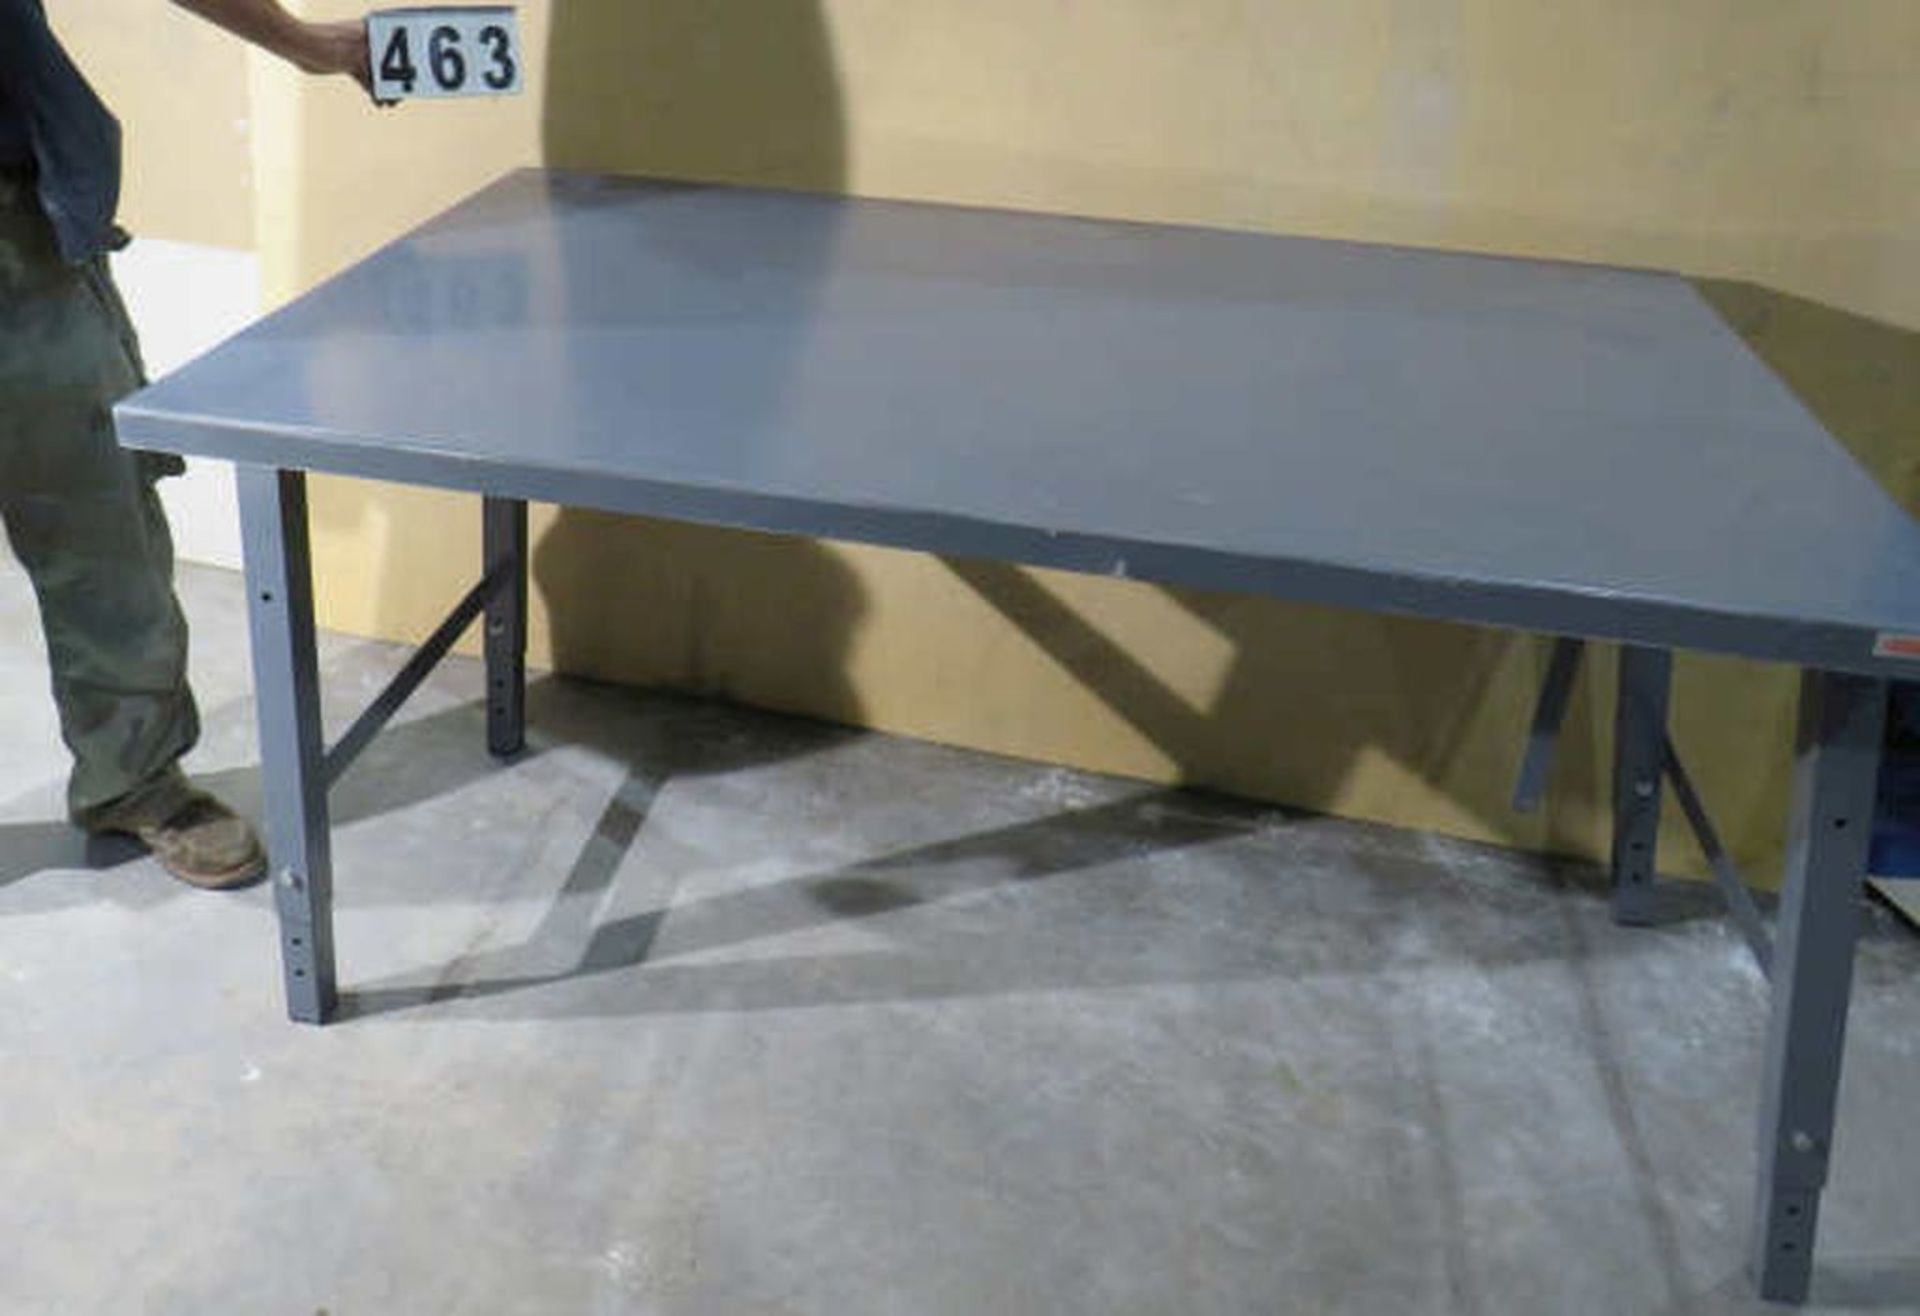 Steel Industrial Work Table, Collapsible, Adjustable height 36"x60"